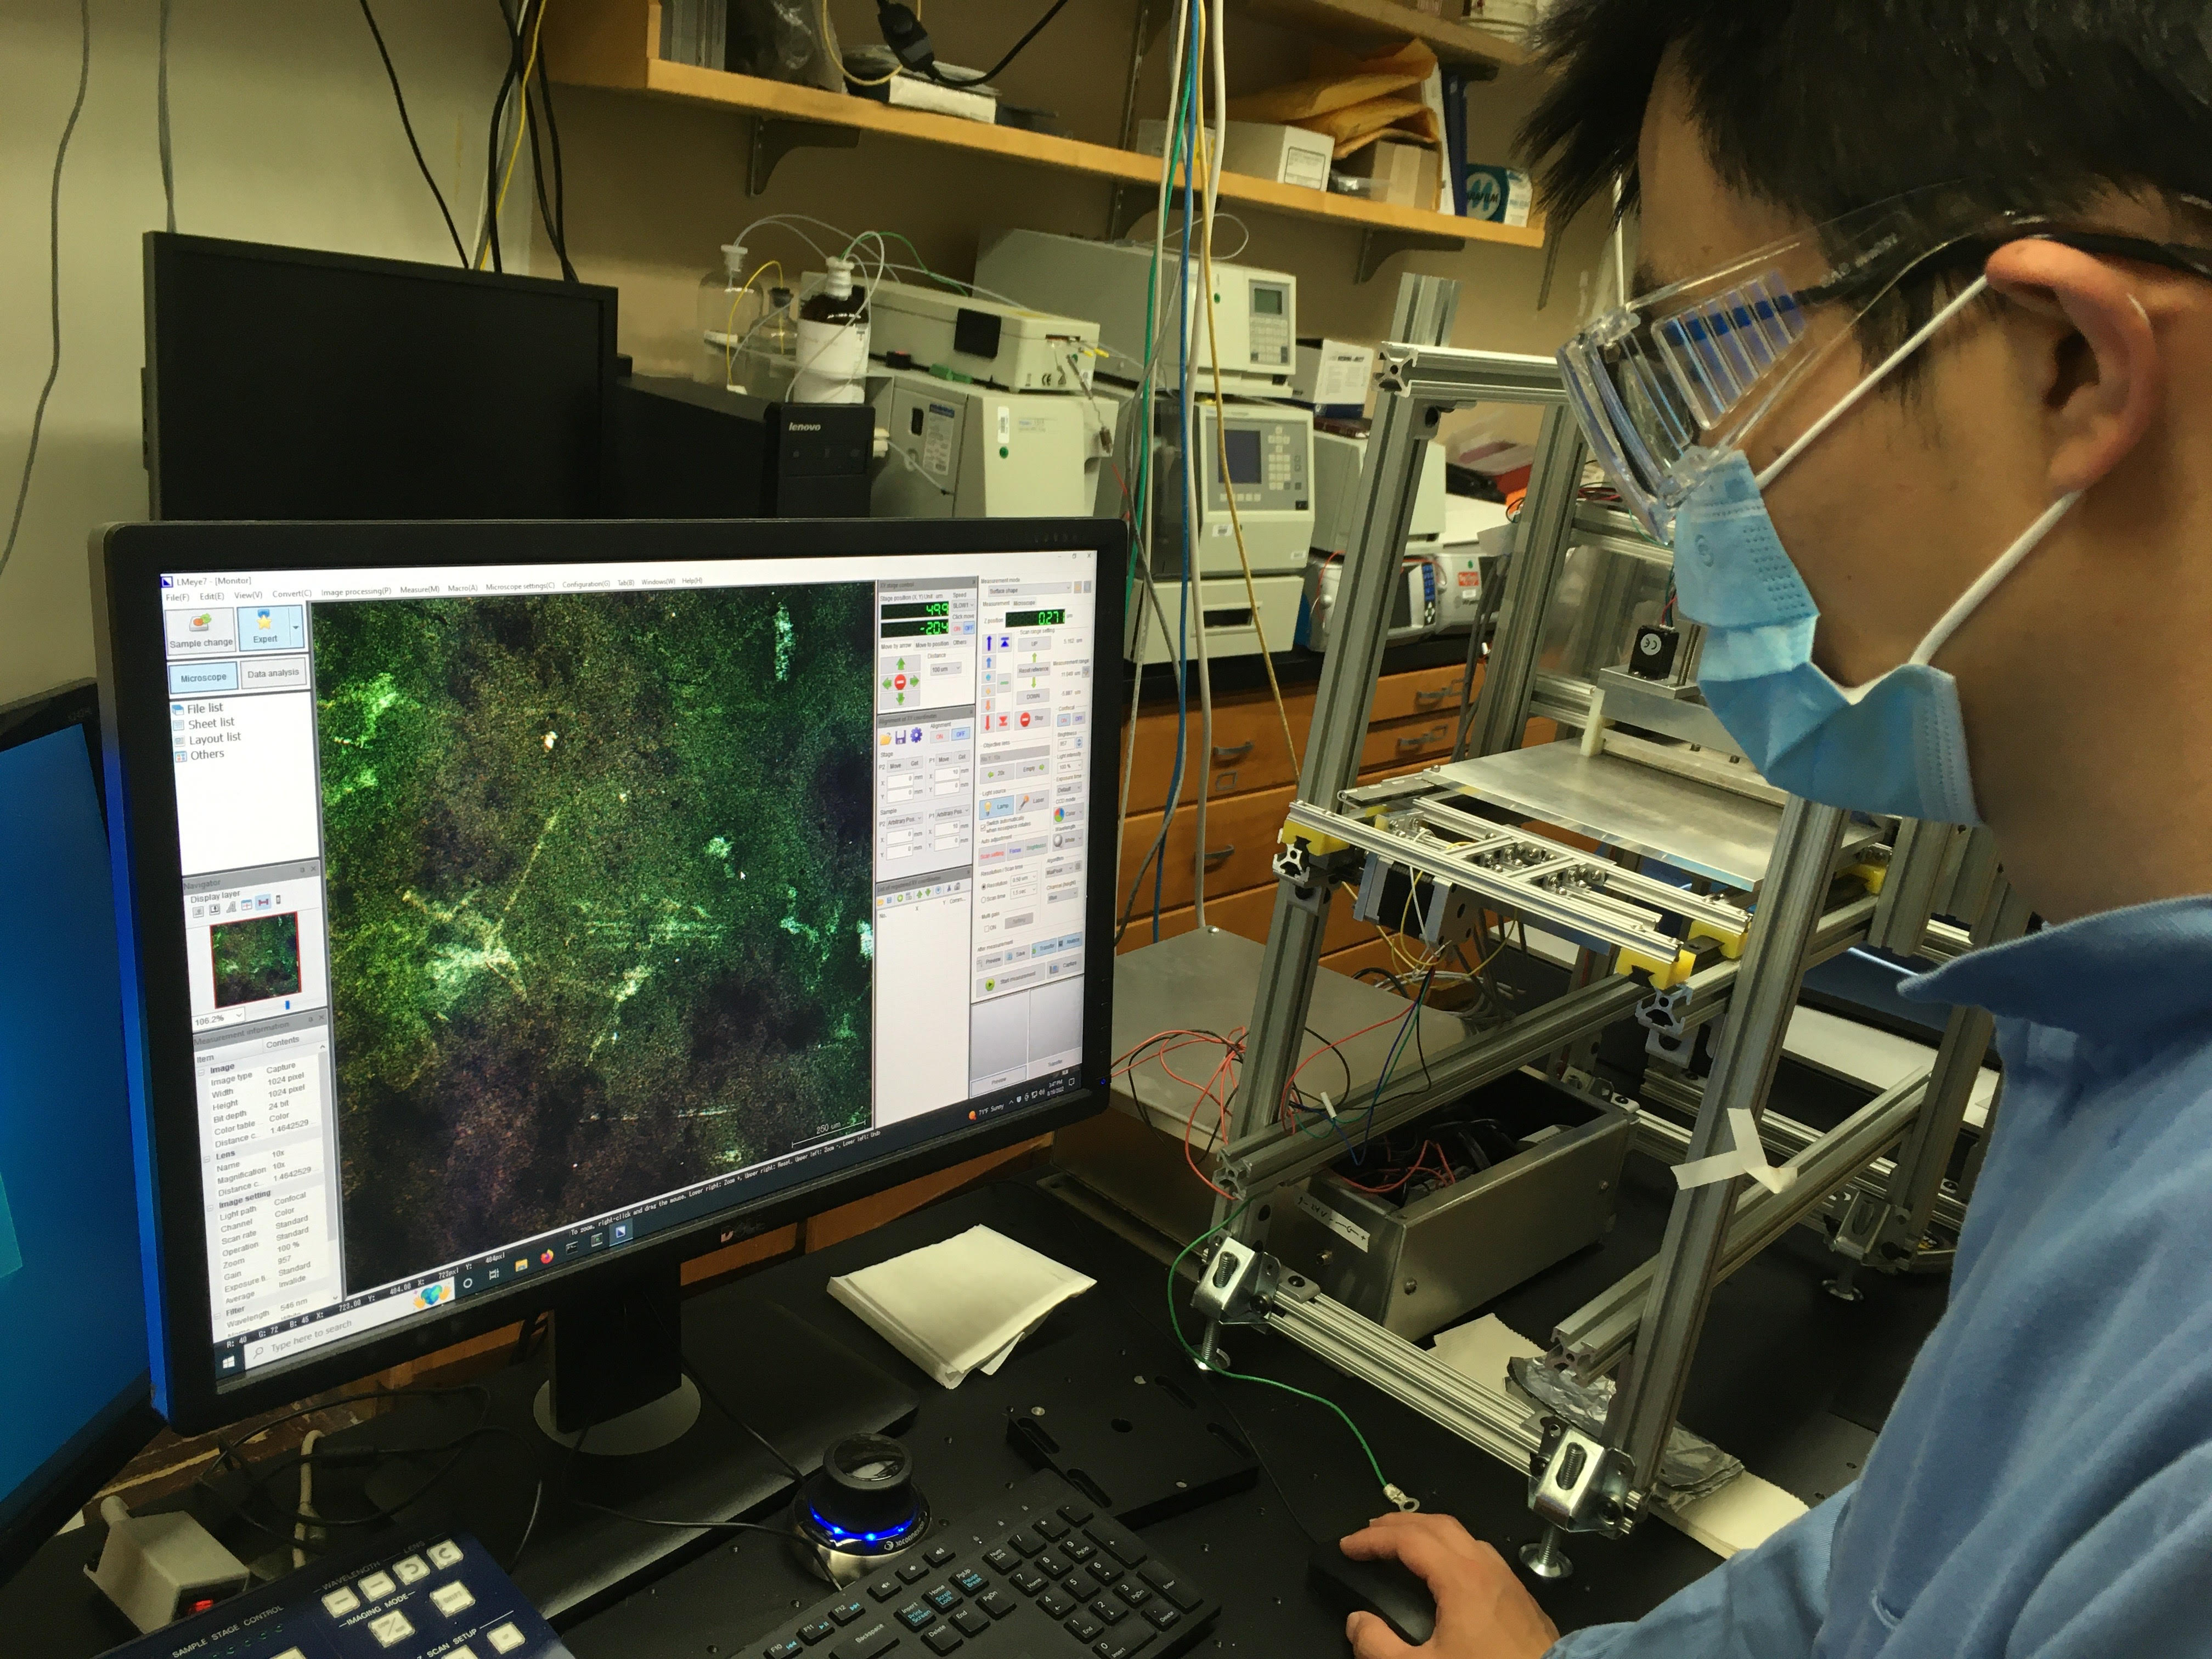 Conducting hard X-ray microradiography observations of drying coatings at the Advanced Light Source (ALS) user facility at Berkeley Lab.